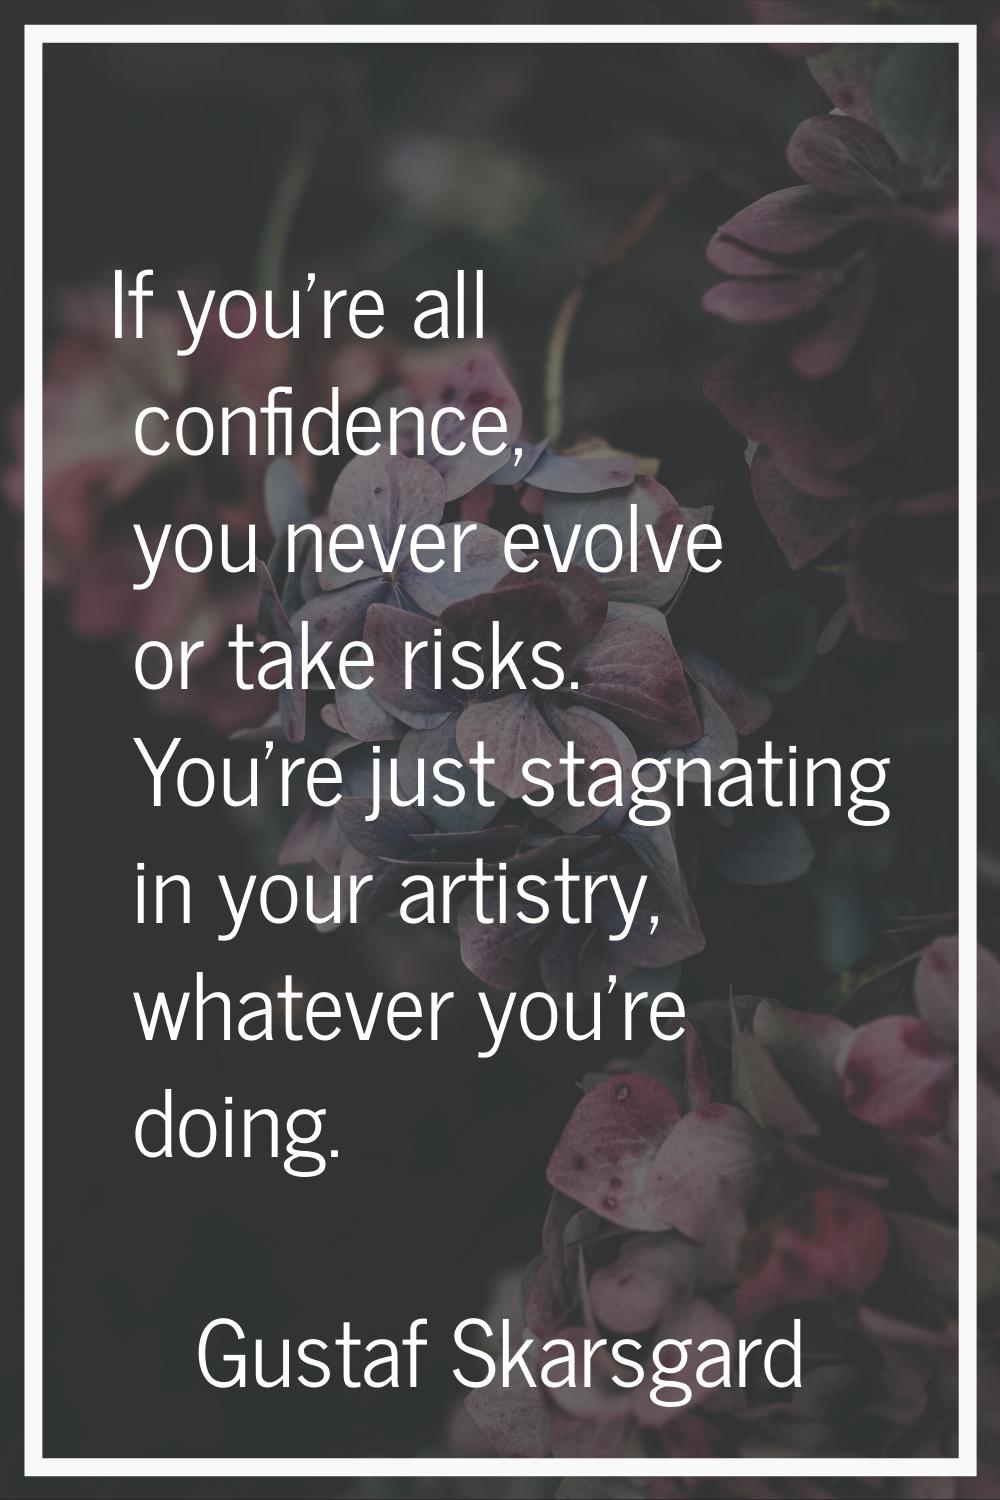 If you're all confidence, you never evolve or take risks. You're just stagnating in your artistry, 